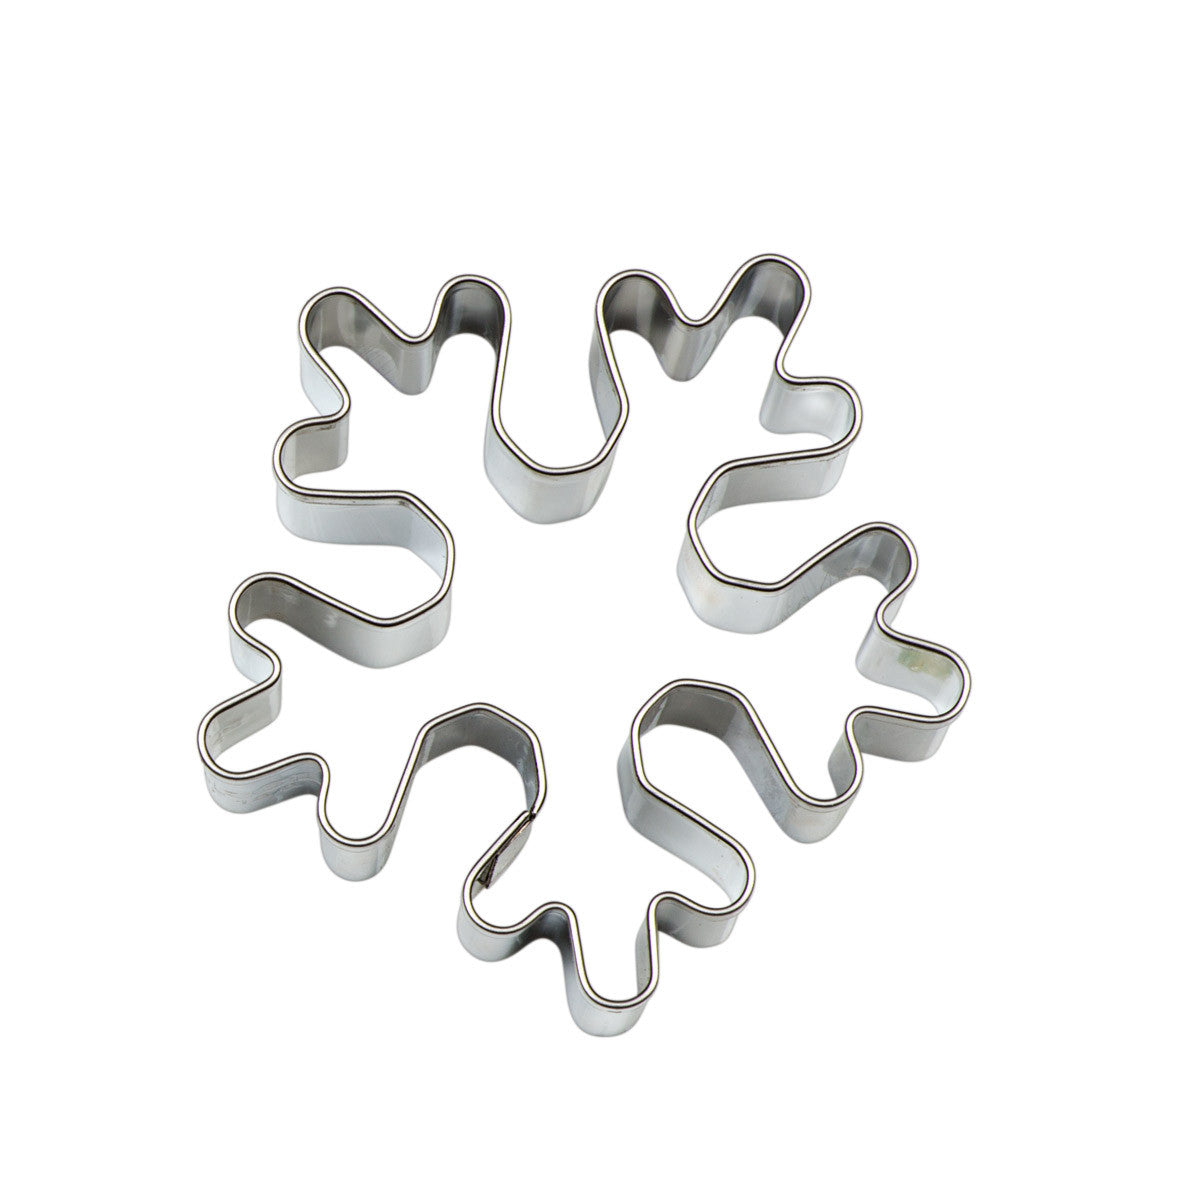 SNOWFLAKE 7 cm COOKIE CUTTER